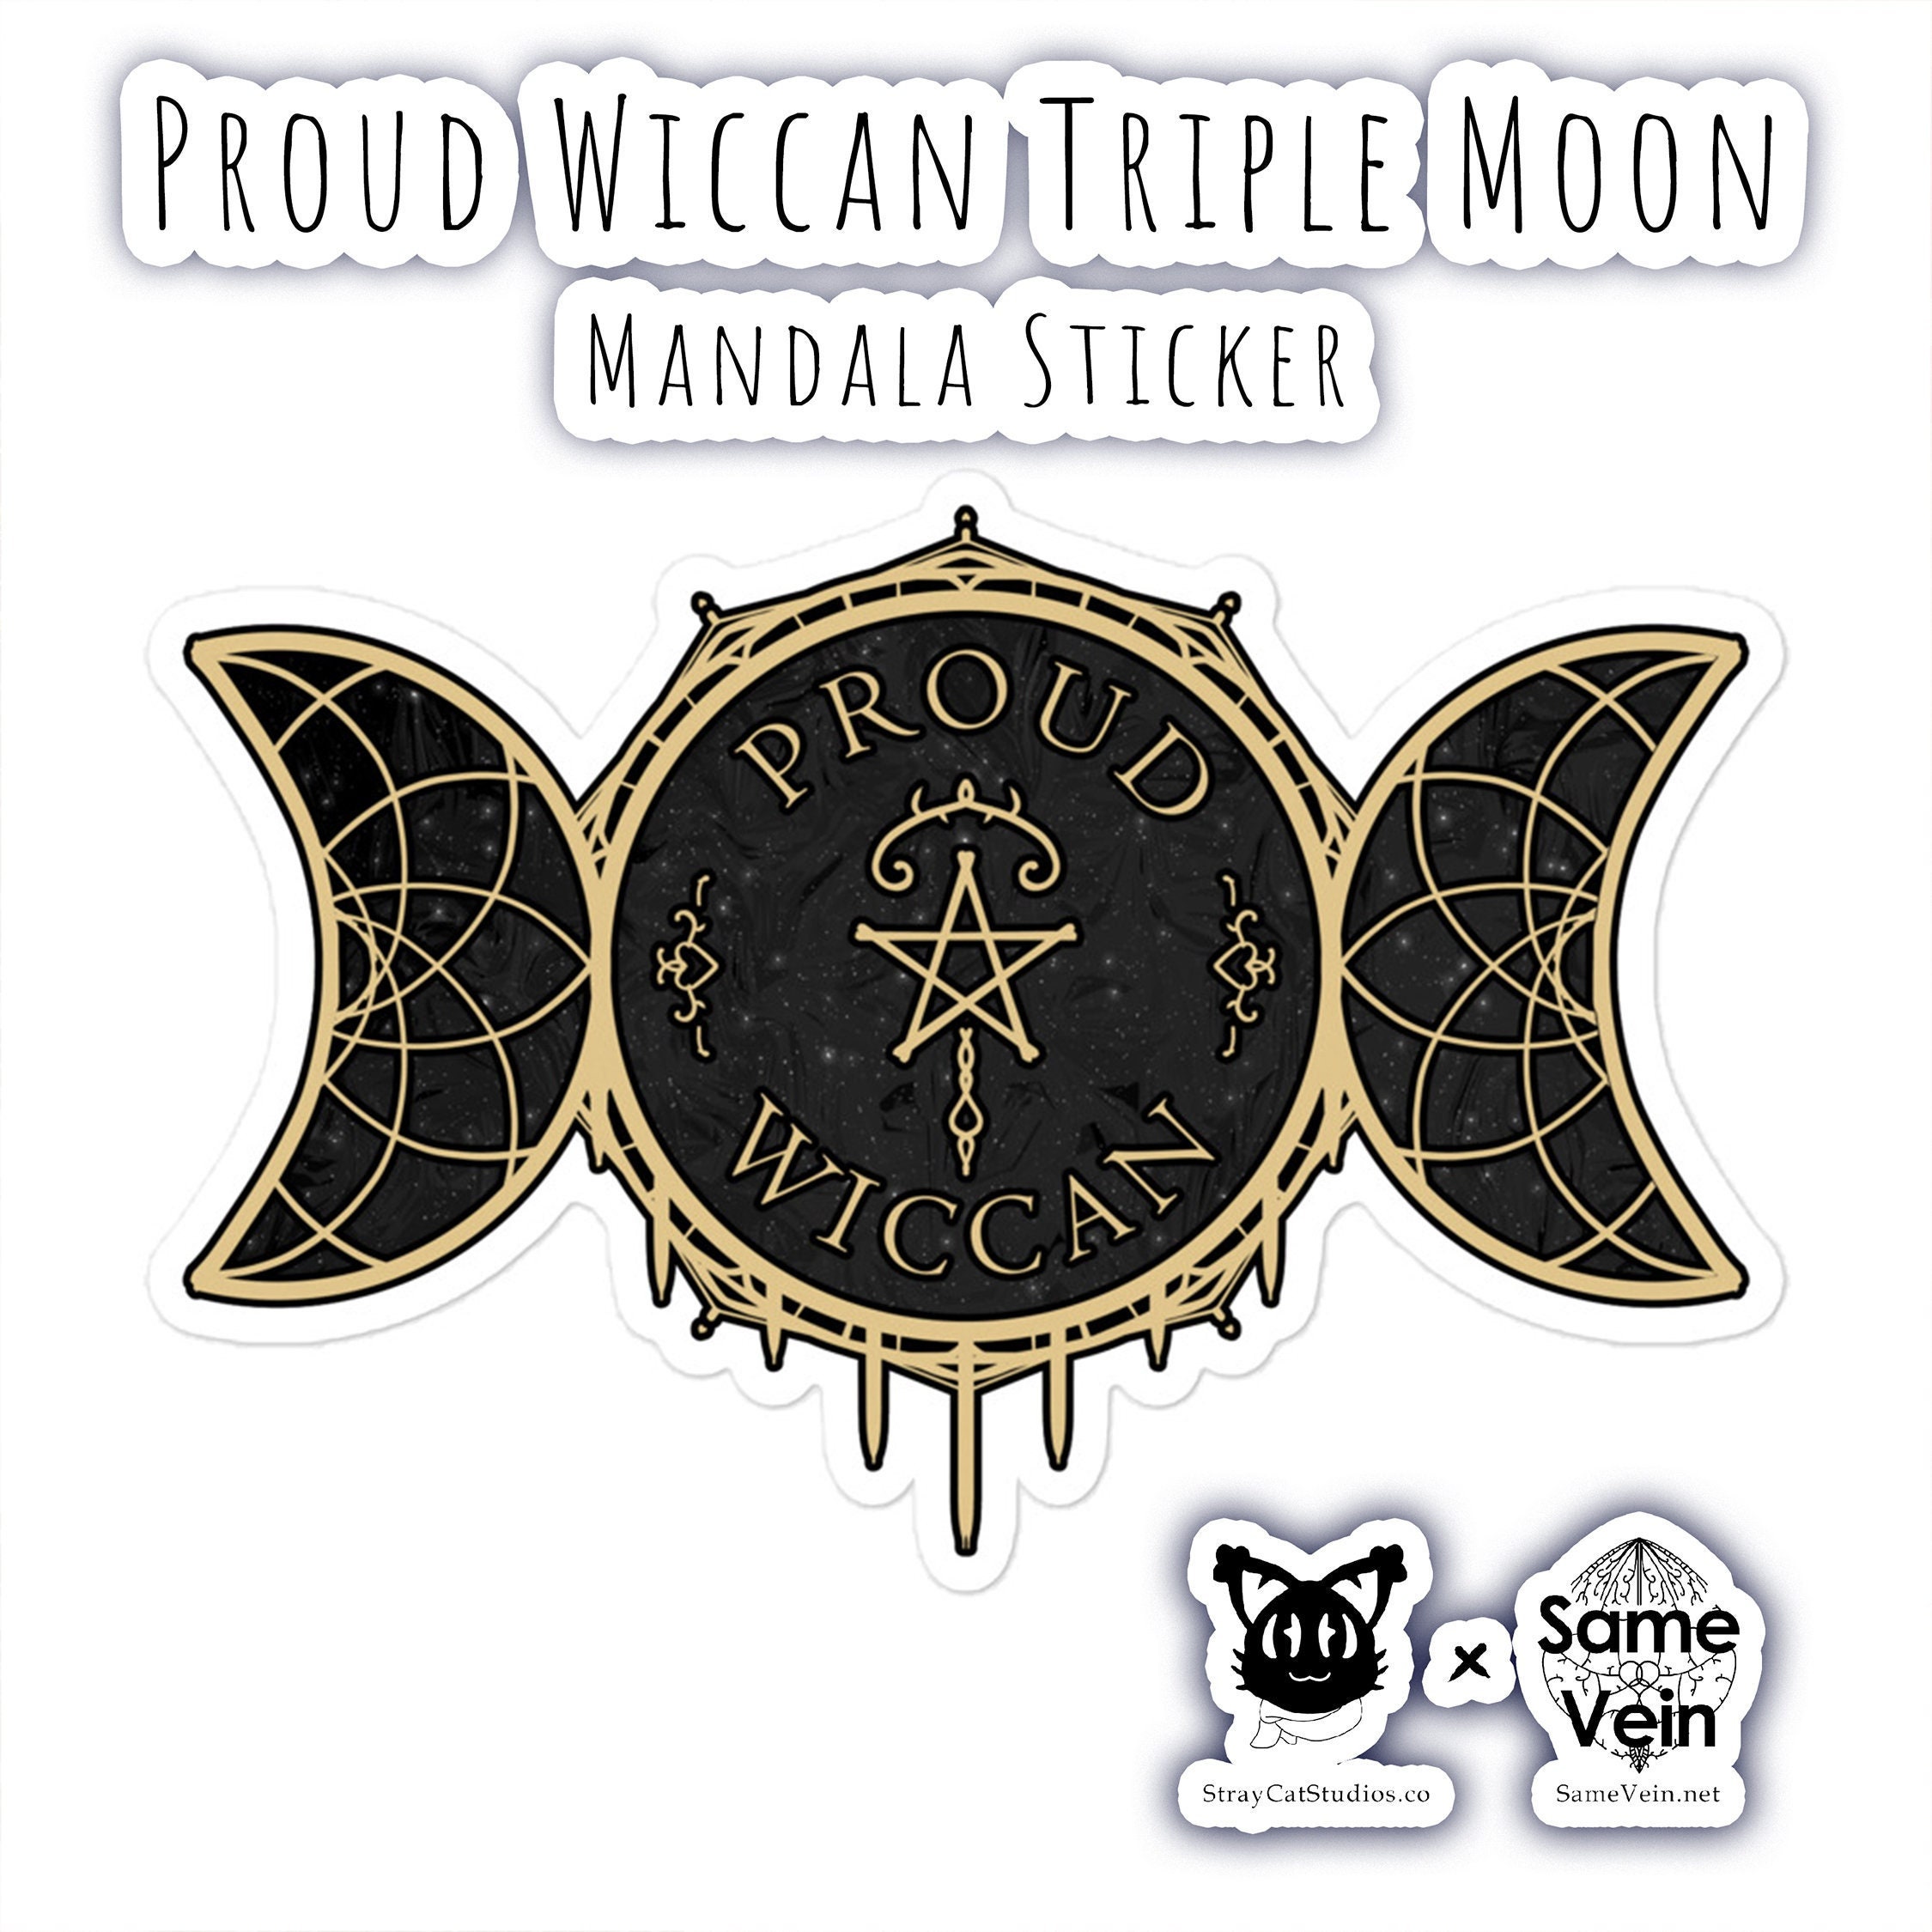 Wiccan Decal - Etsy